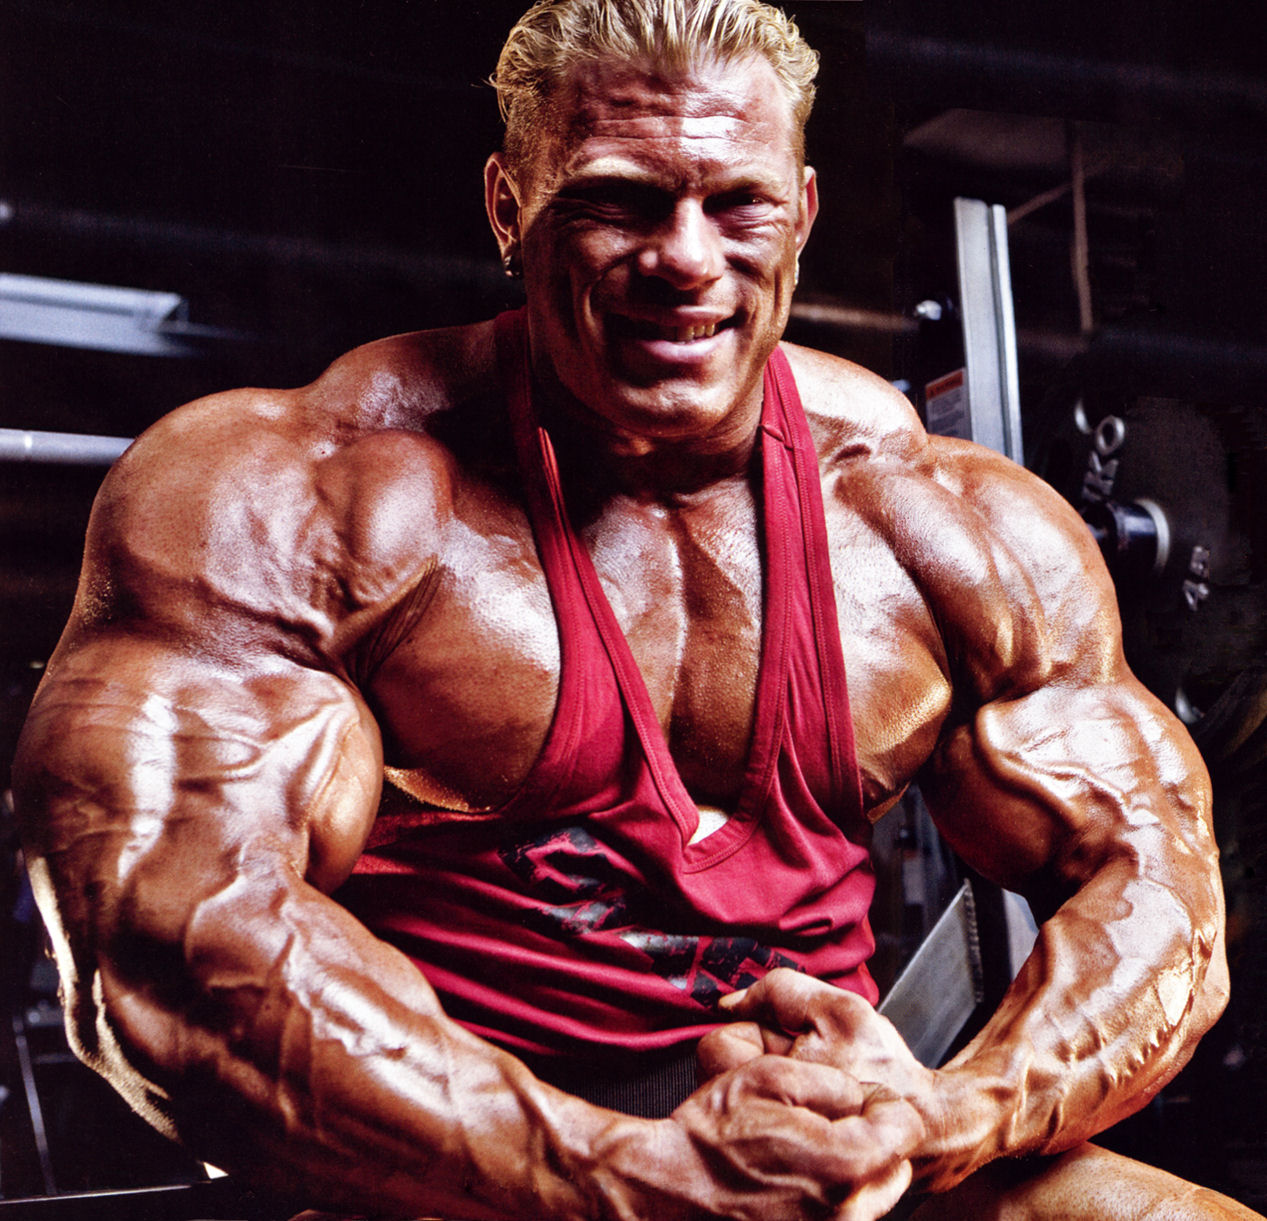 Critical Facts About The Use Of Steroids For Bodybuilding